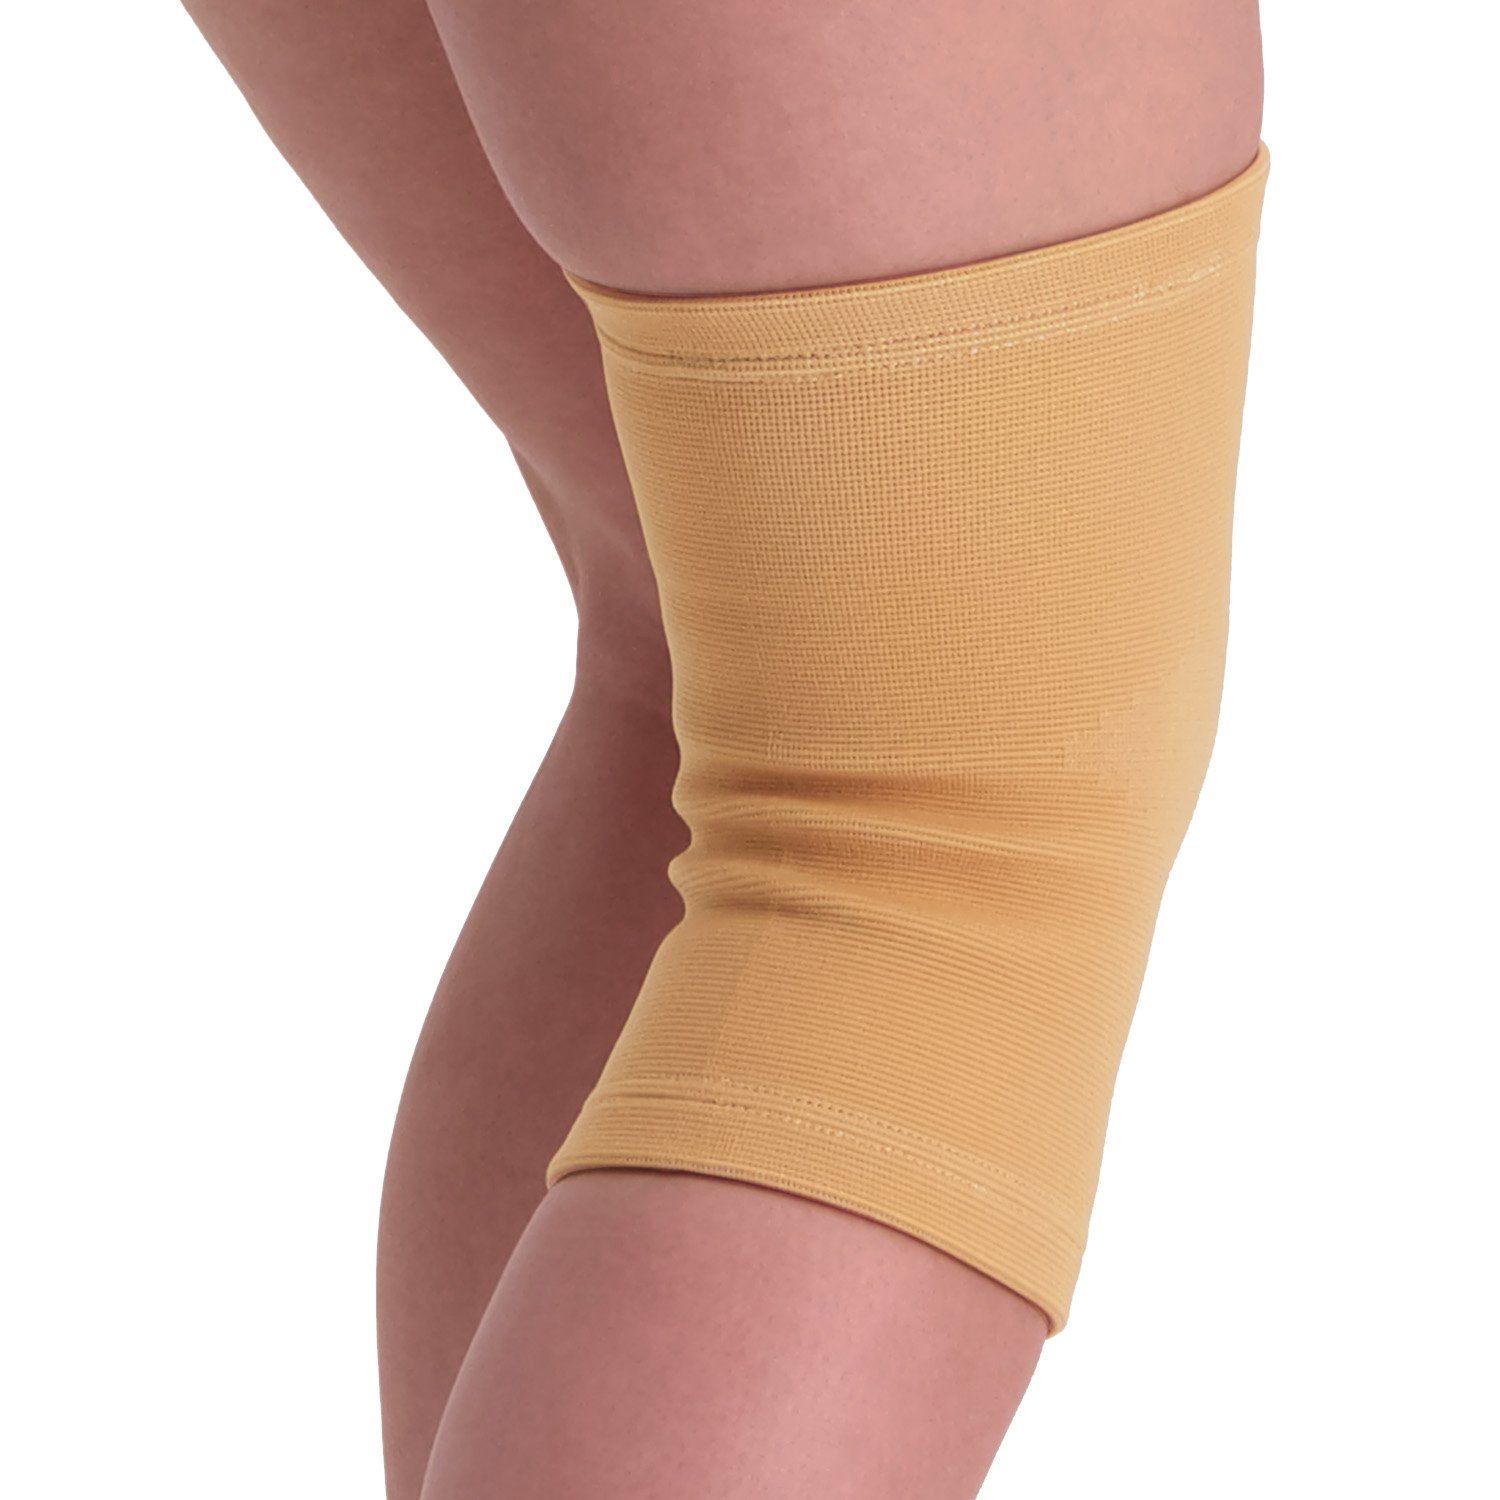 Dunimed knee sleeve from behind